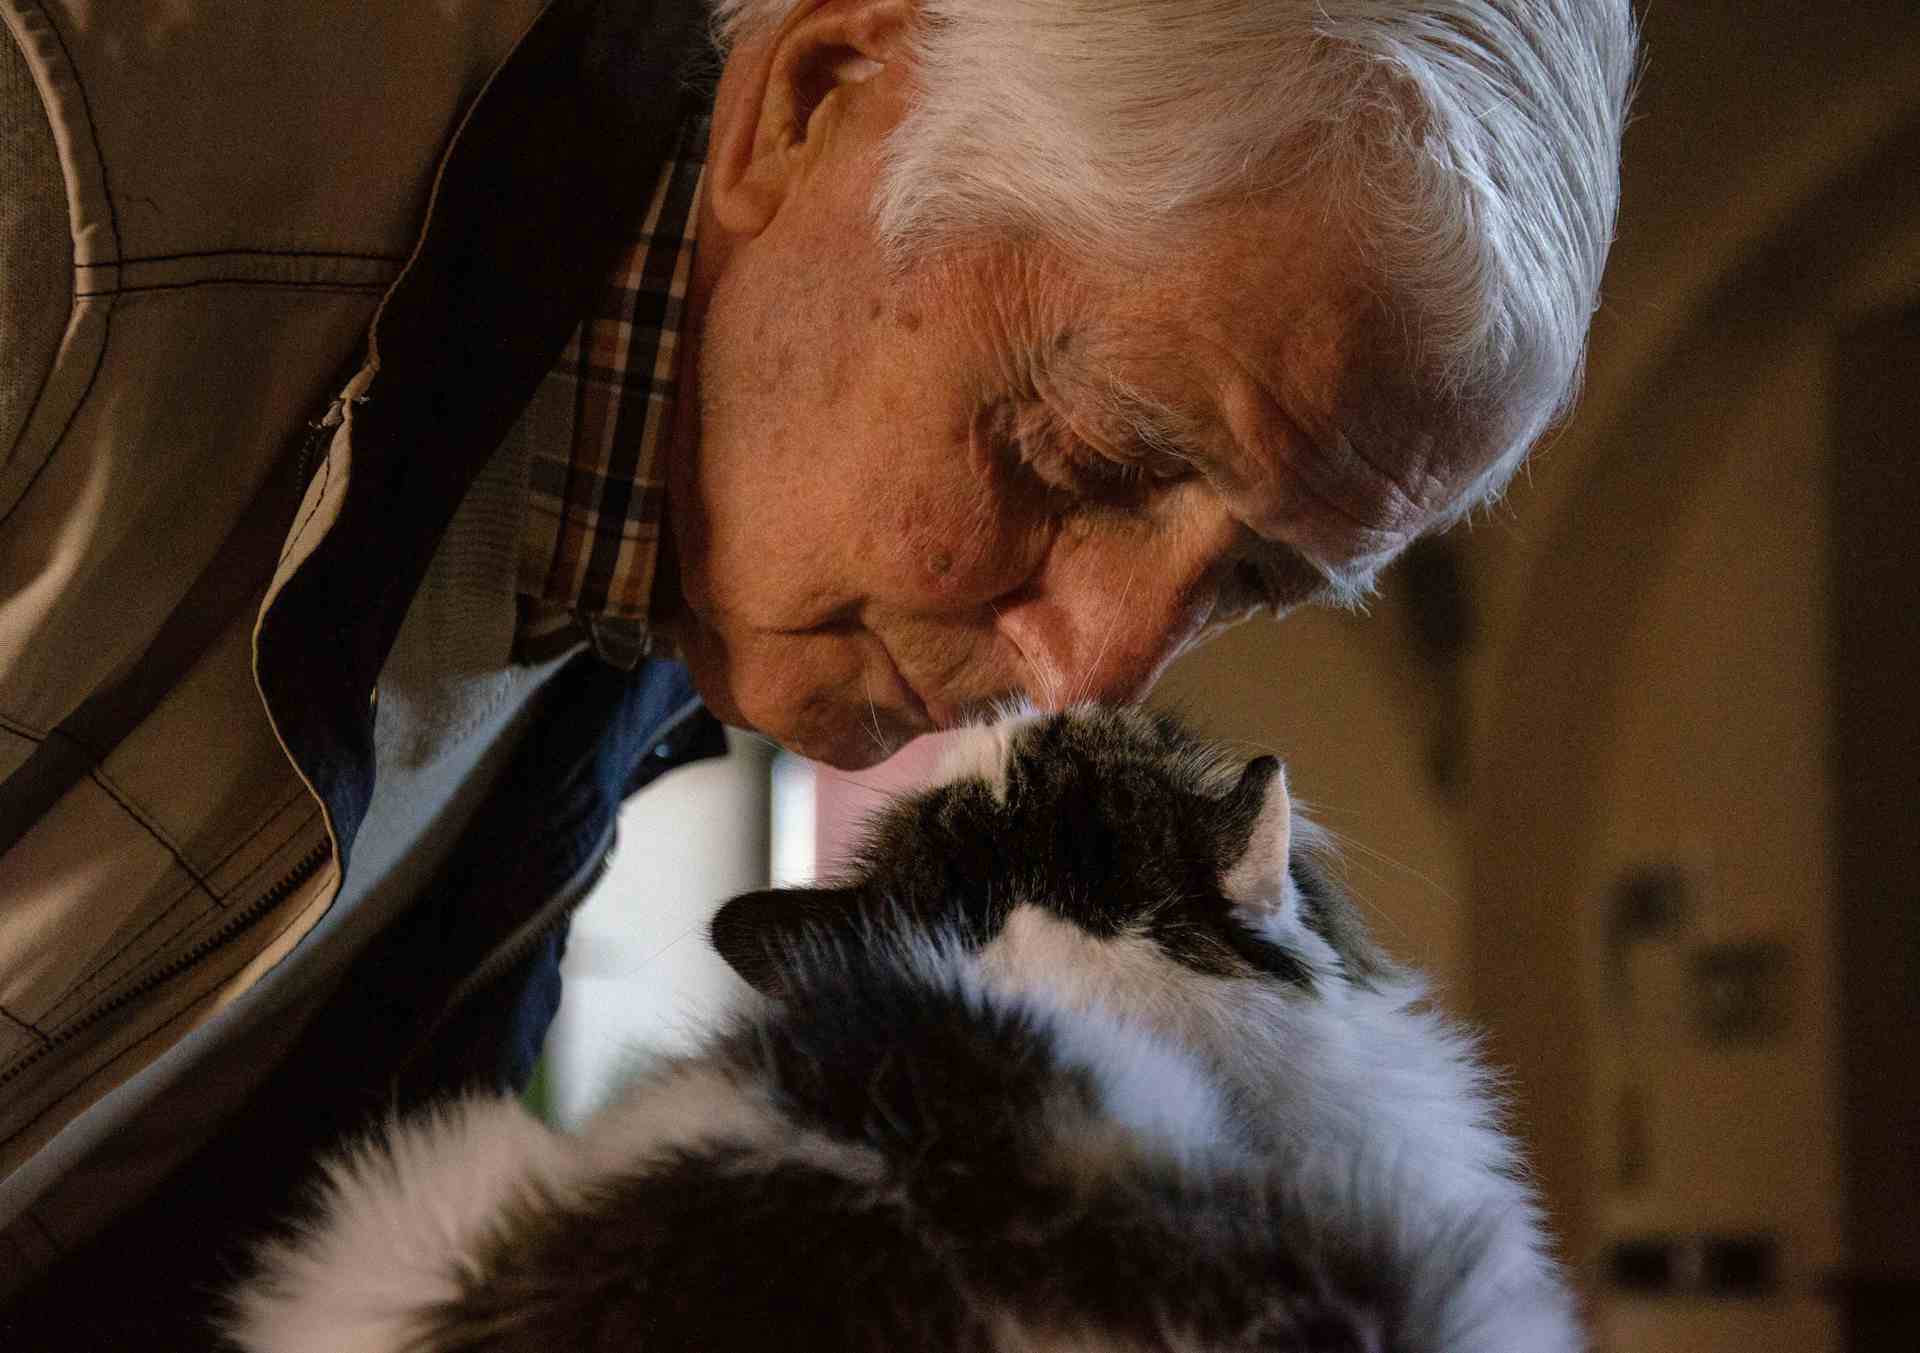 A cat eskimo kisses its owner. Cat separation anxiety occurs when the cat is alone. 